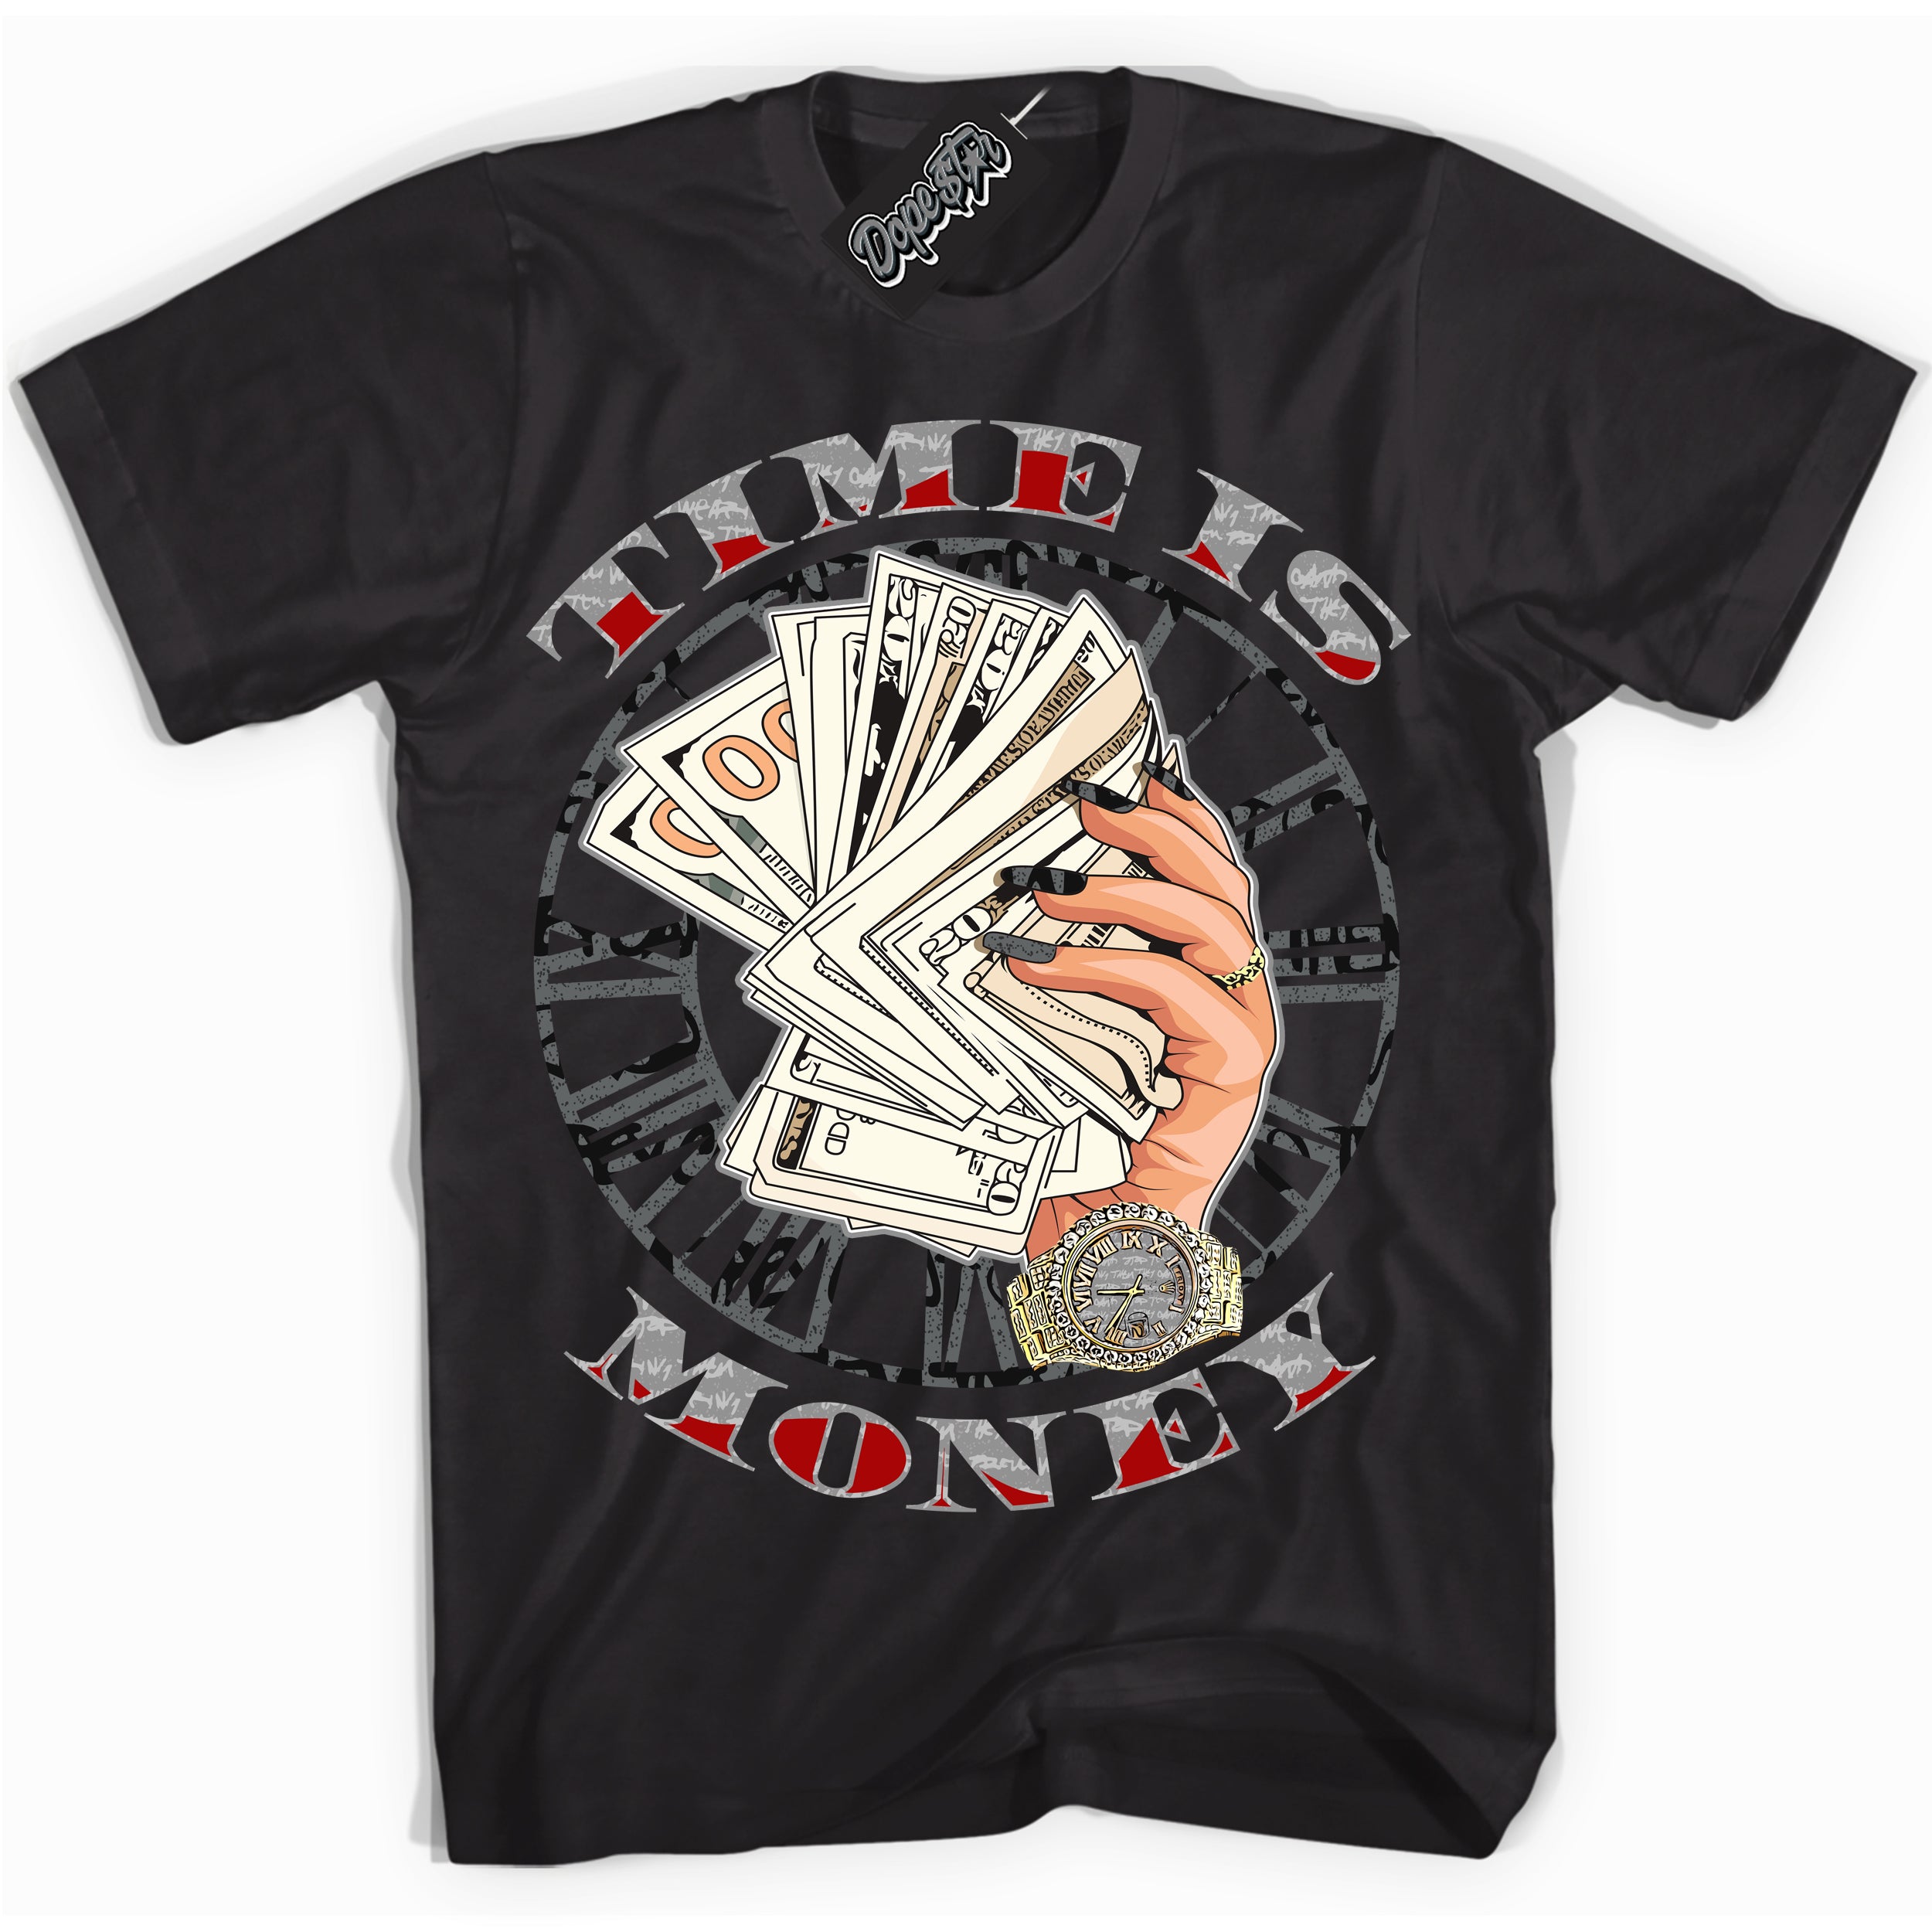 Cool Black Shirt with “ Time Is Money ” design that perfectly matches Rebellionaire 1s Sneakers.